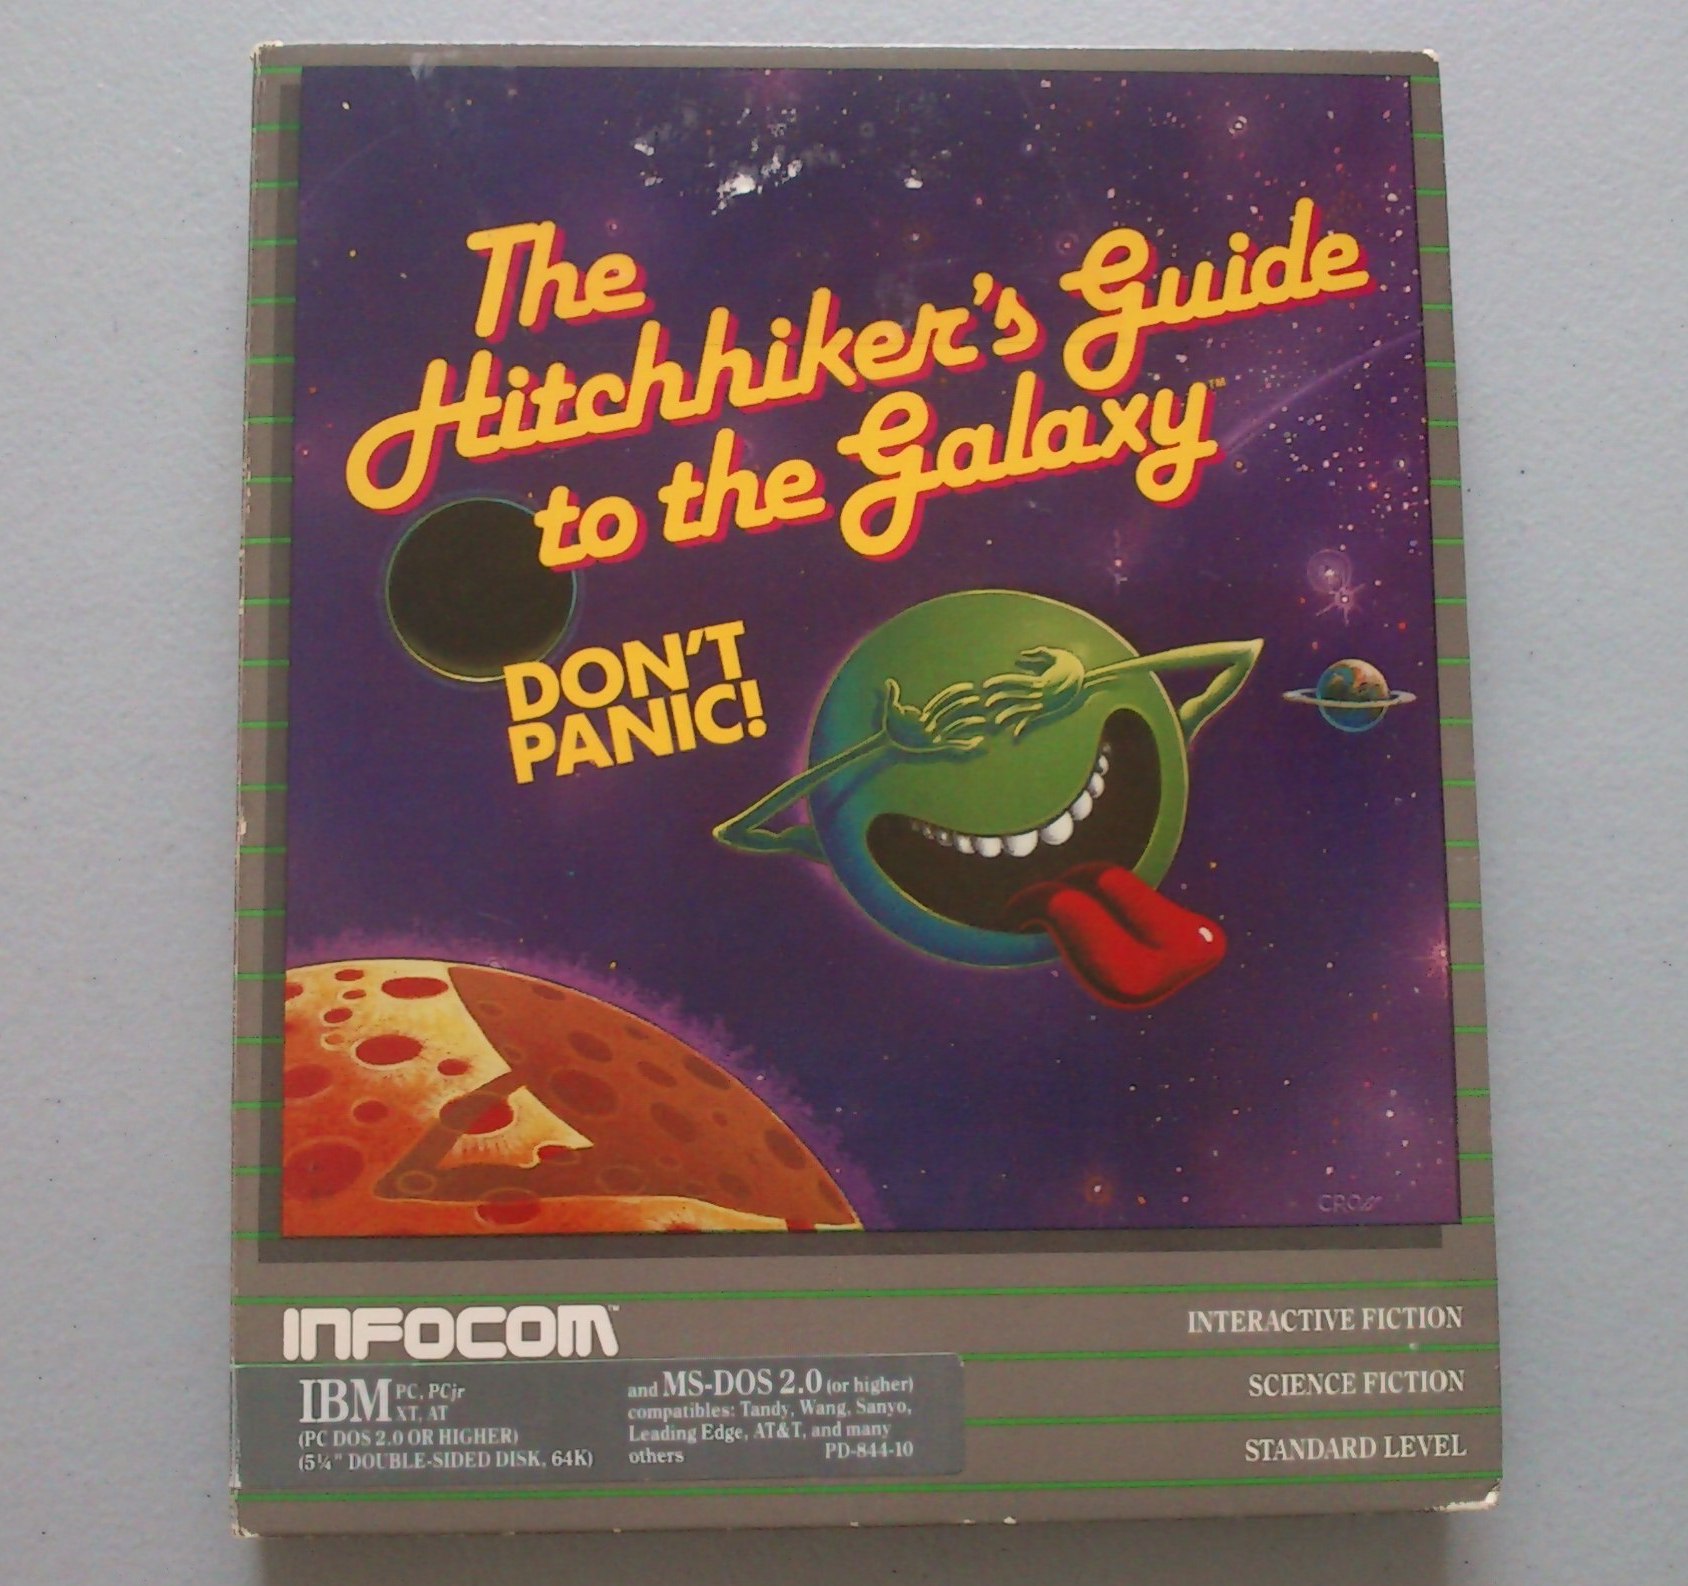 BBC Releases 30th Anniversary Edition Of The Hitchhiker's Guide To The  Galaxy Text Adventure Game. You Have Died (And Gone To Gaming Heaven)